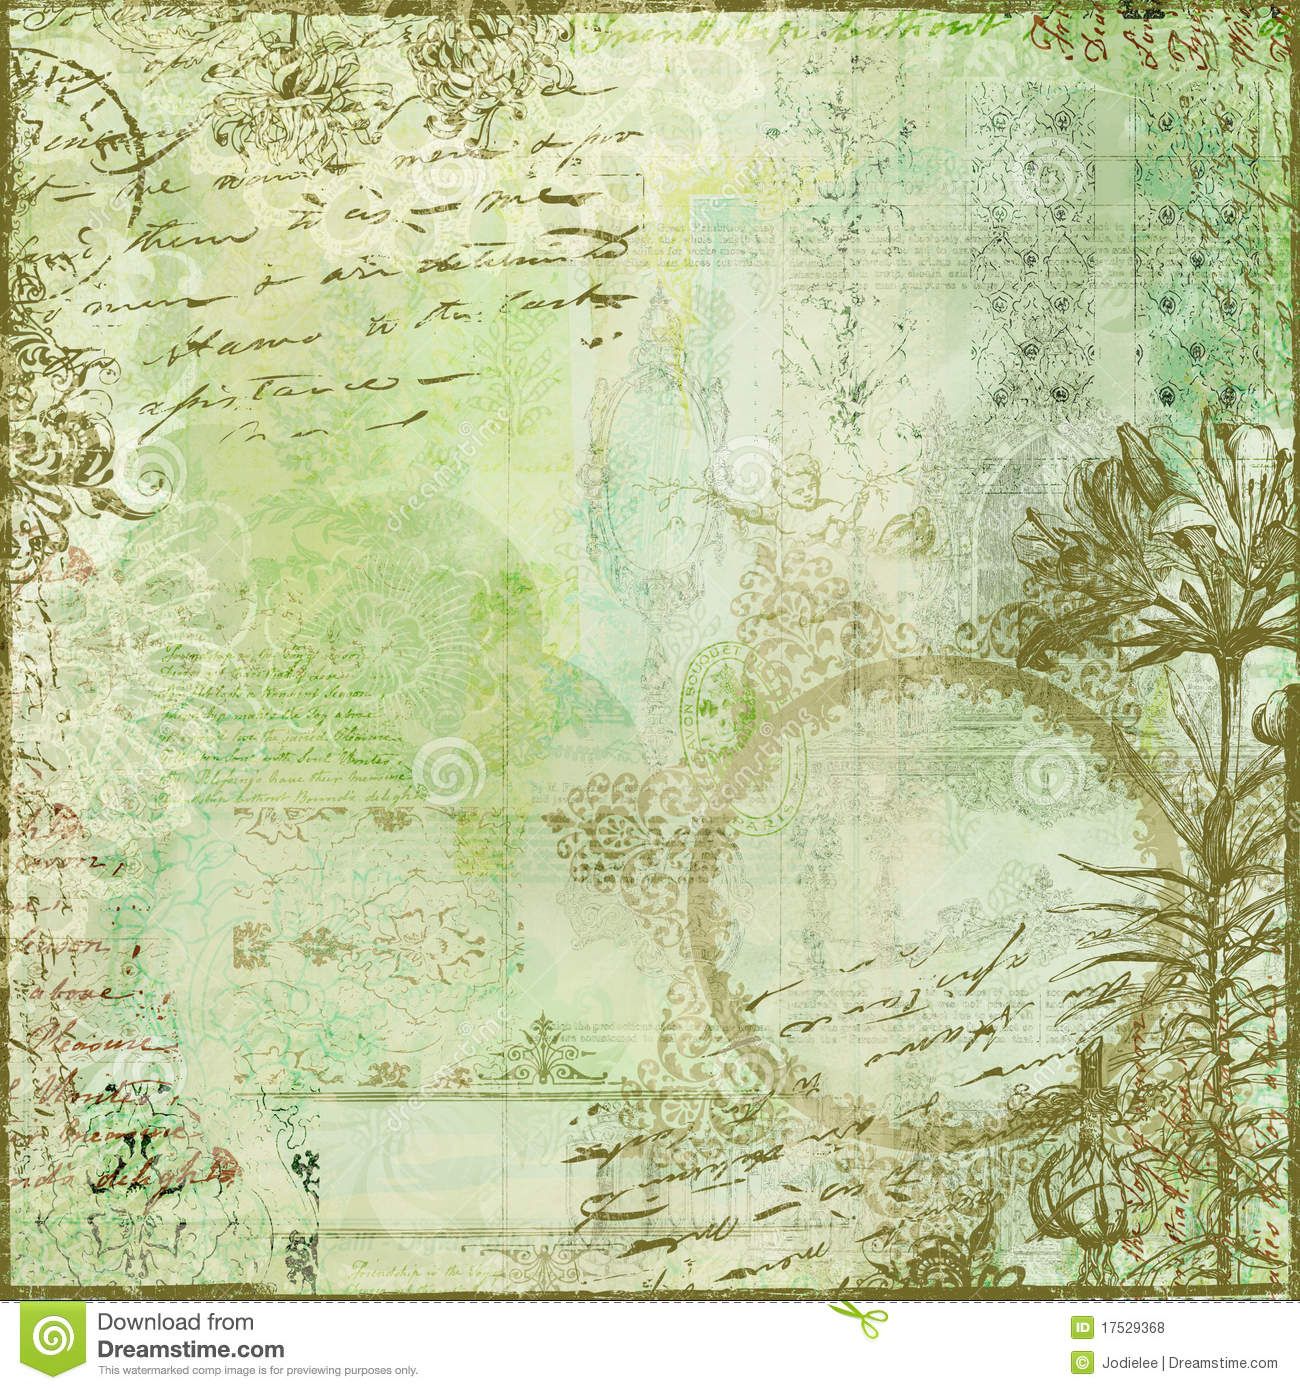 free-download-amazing-picture-of-scrapbook-backgrounds-paper